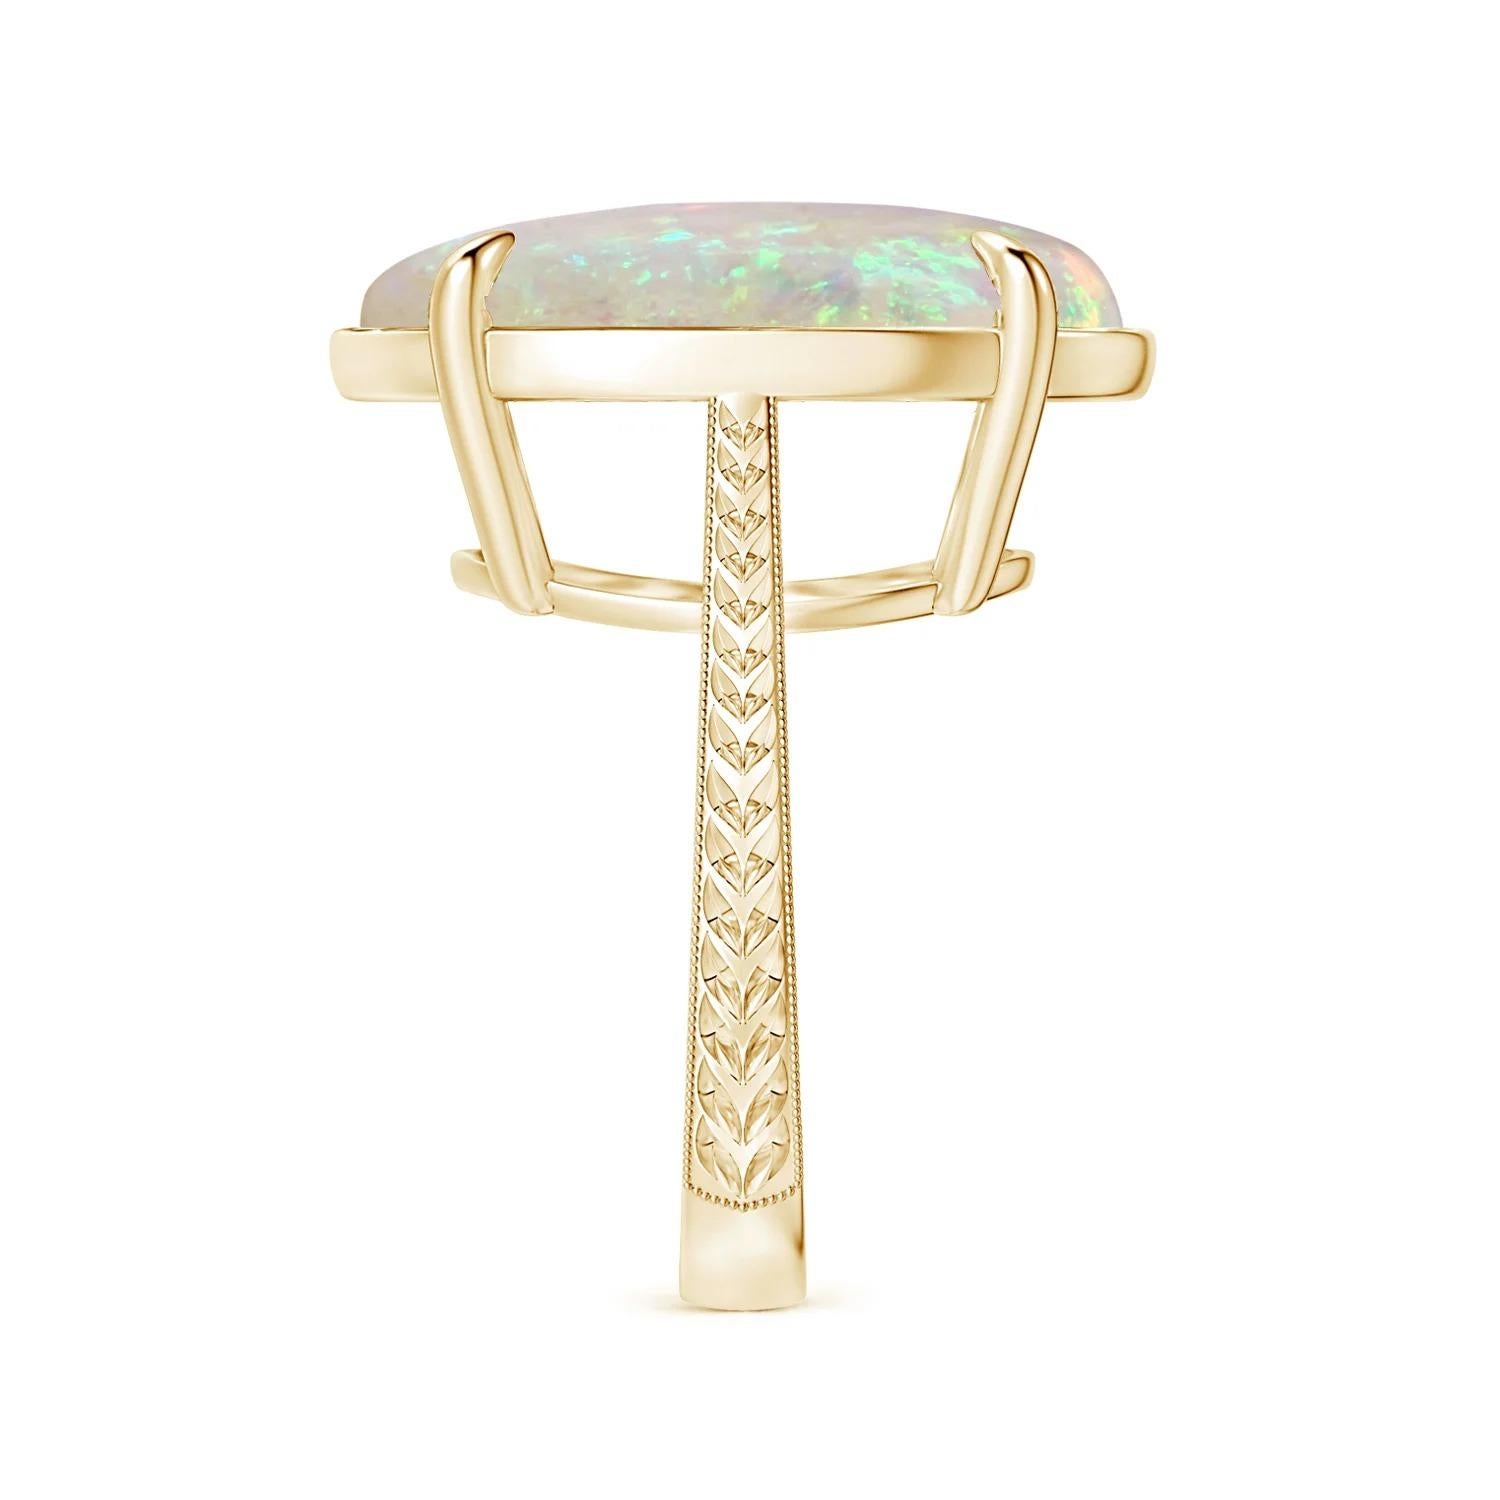 For Sale:  Angara Gia Certified Solitaire Opal Ring in Yellow Gold with Leaf Motifs 4